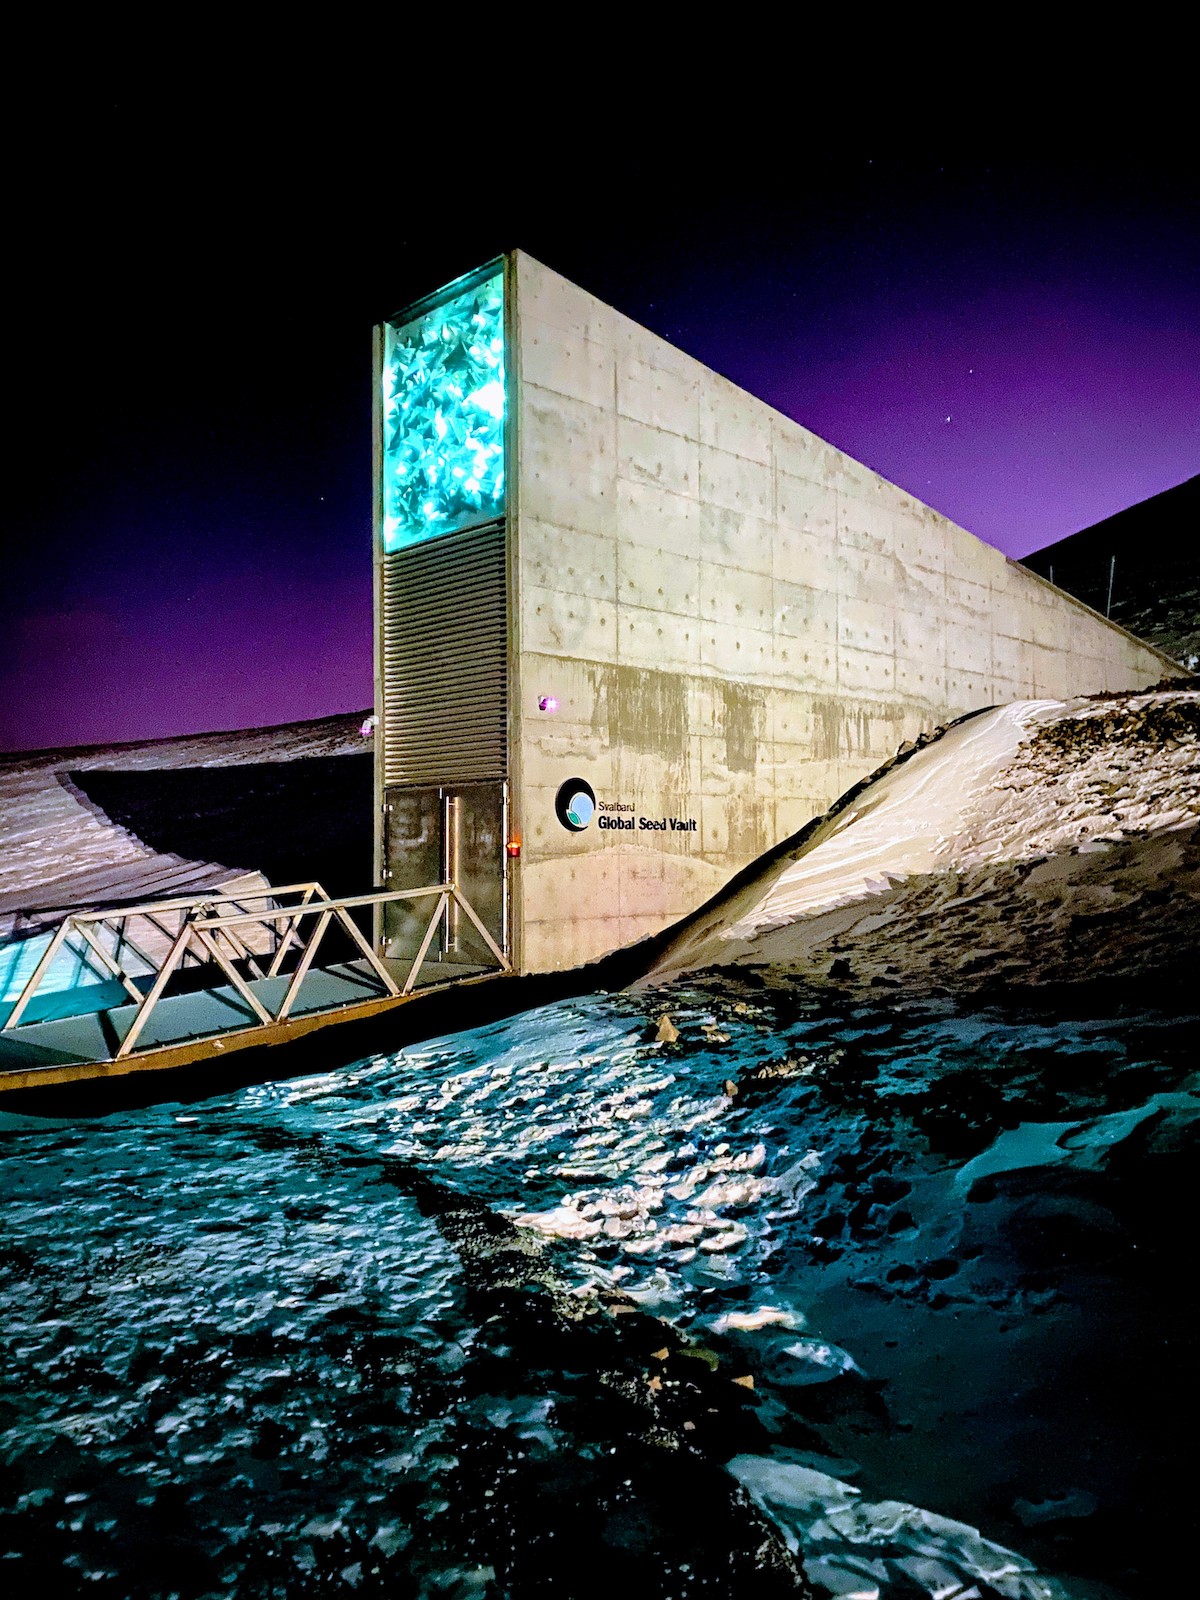 Xentrance to the seed vault